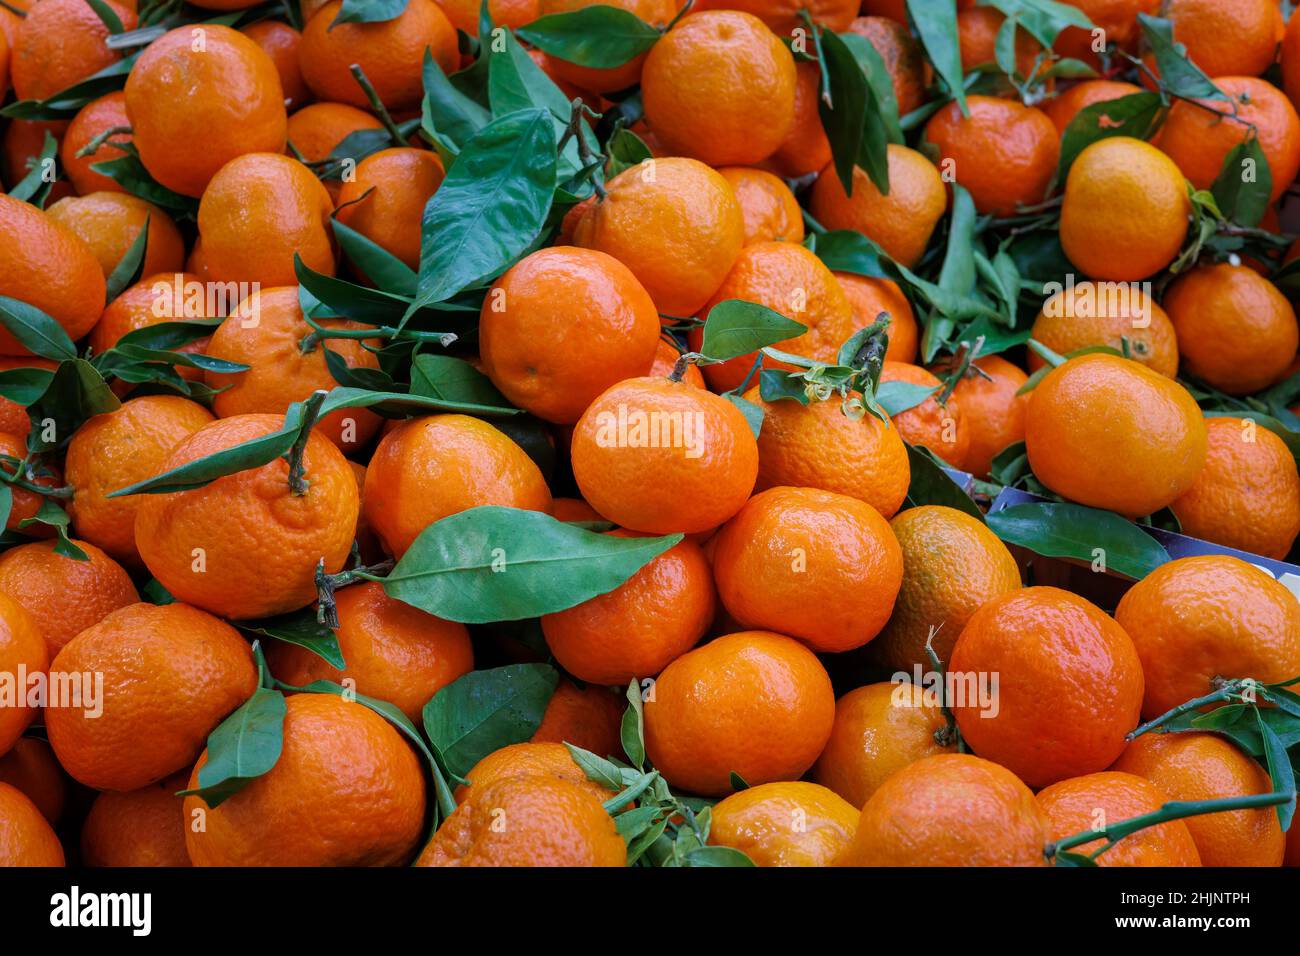 Piles of clementine fruit for sale on a market stall in Southall, Middlesex Stock Photo